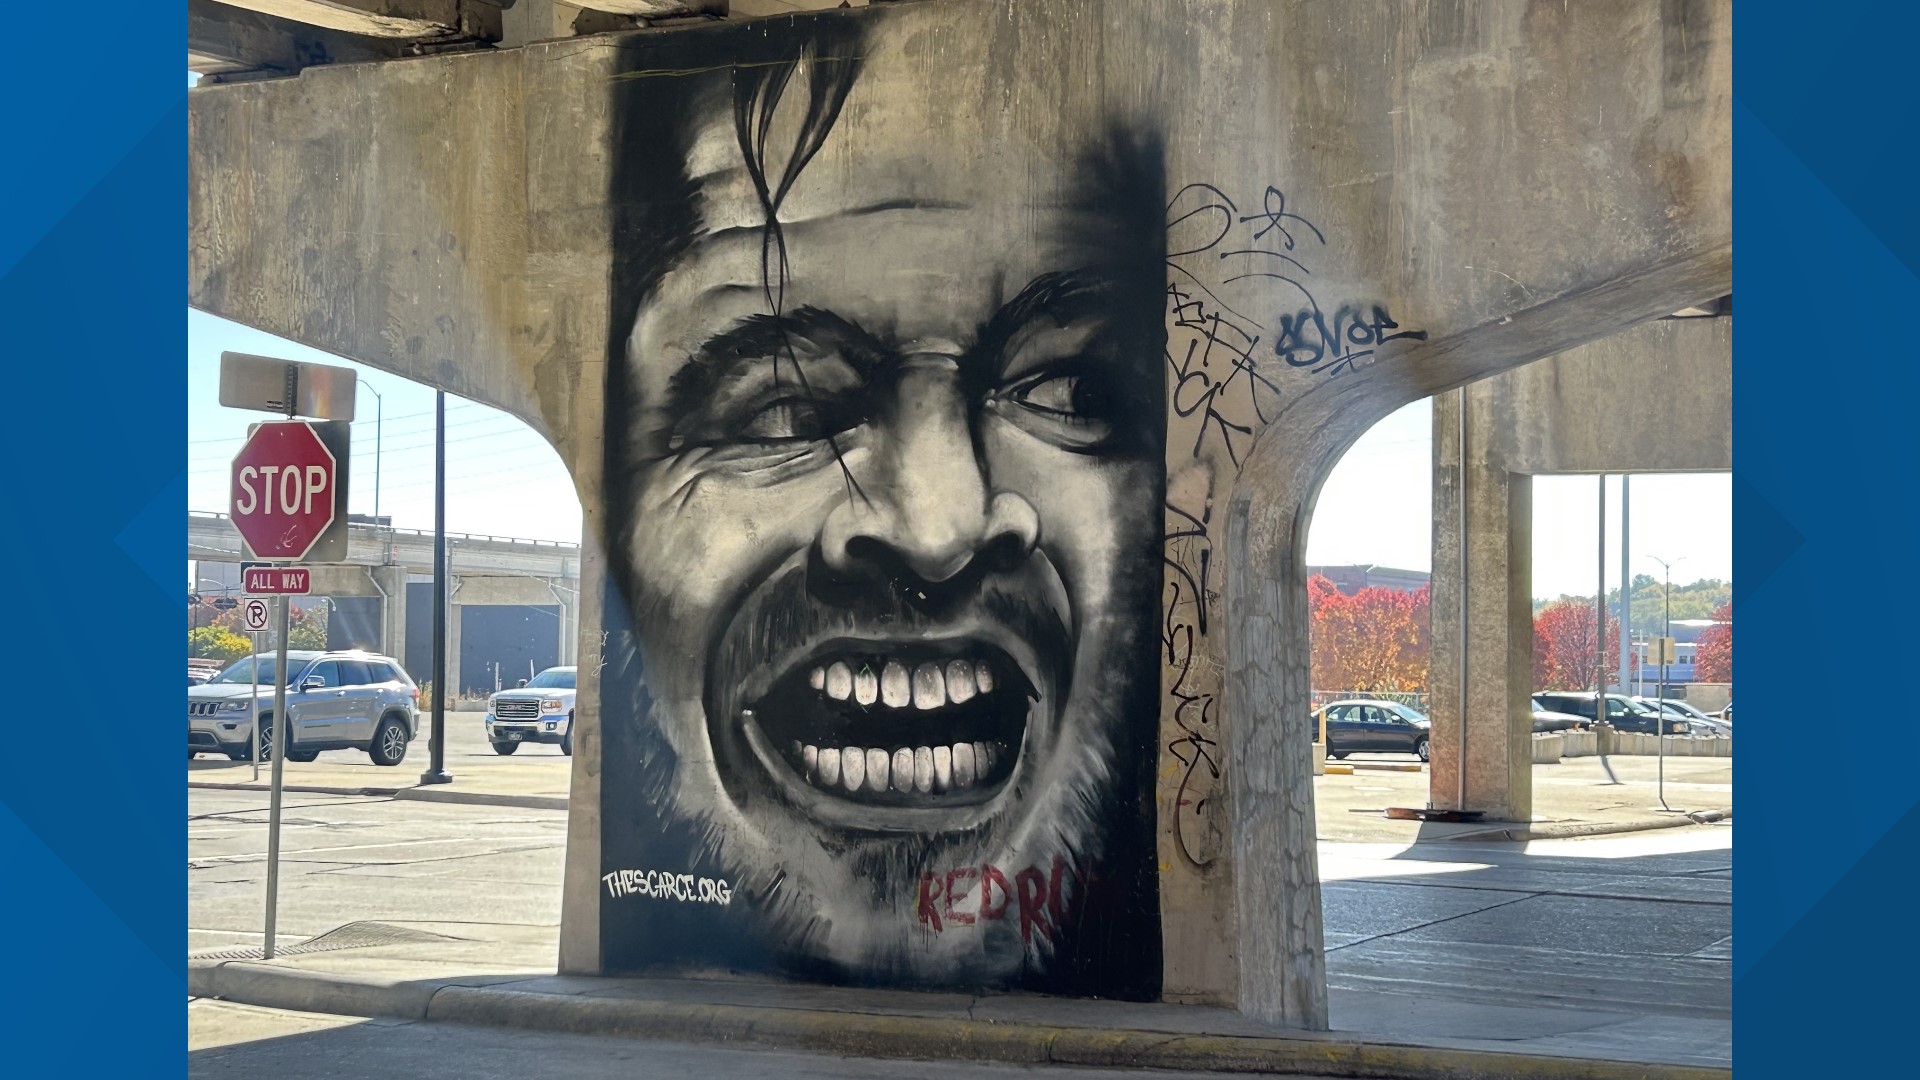 In a statement to Local 5, the Des Moines engineering department said they were unaware of how and when the mural was placed on the SW 9th Viaduct.